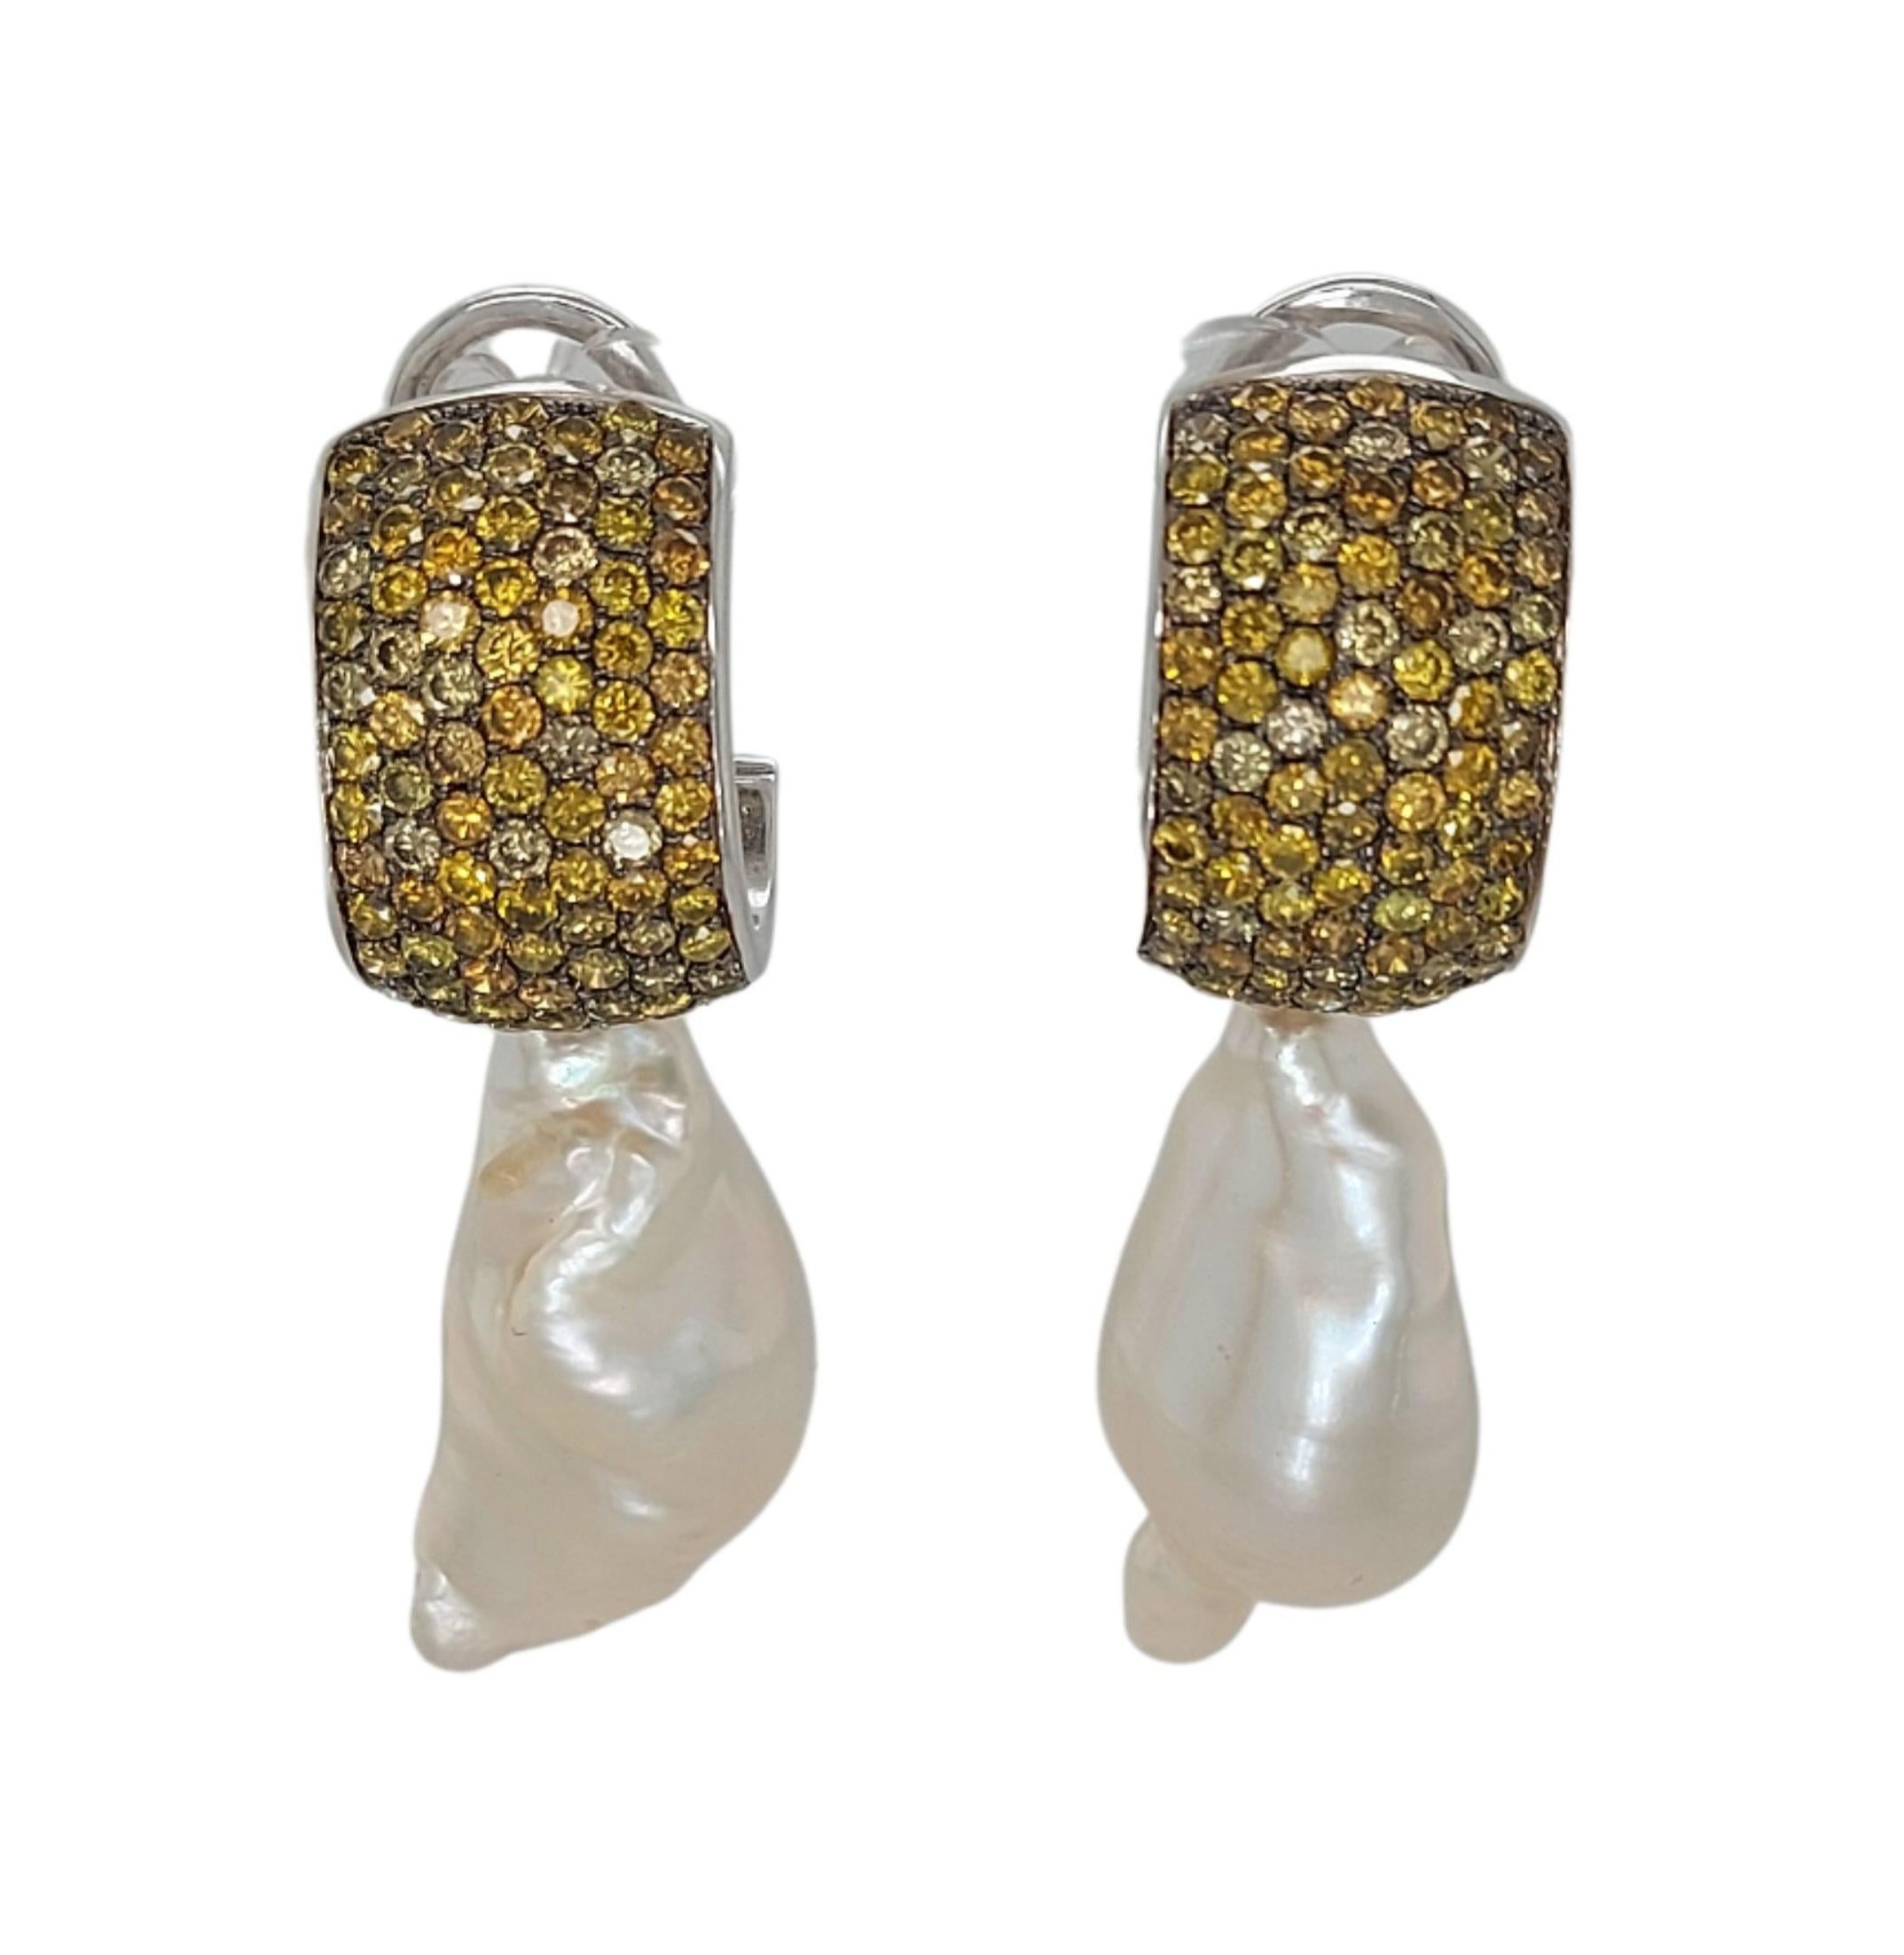 Brilliant Cut 18kt White Gold Earrings with Yellow/Cognac 5.25ct Diamonds & 4 Removable Pieces For Sale